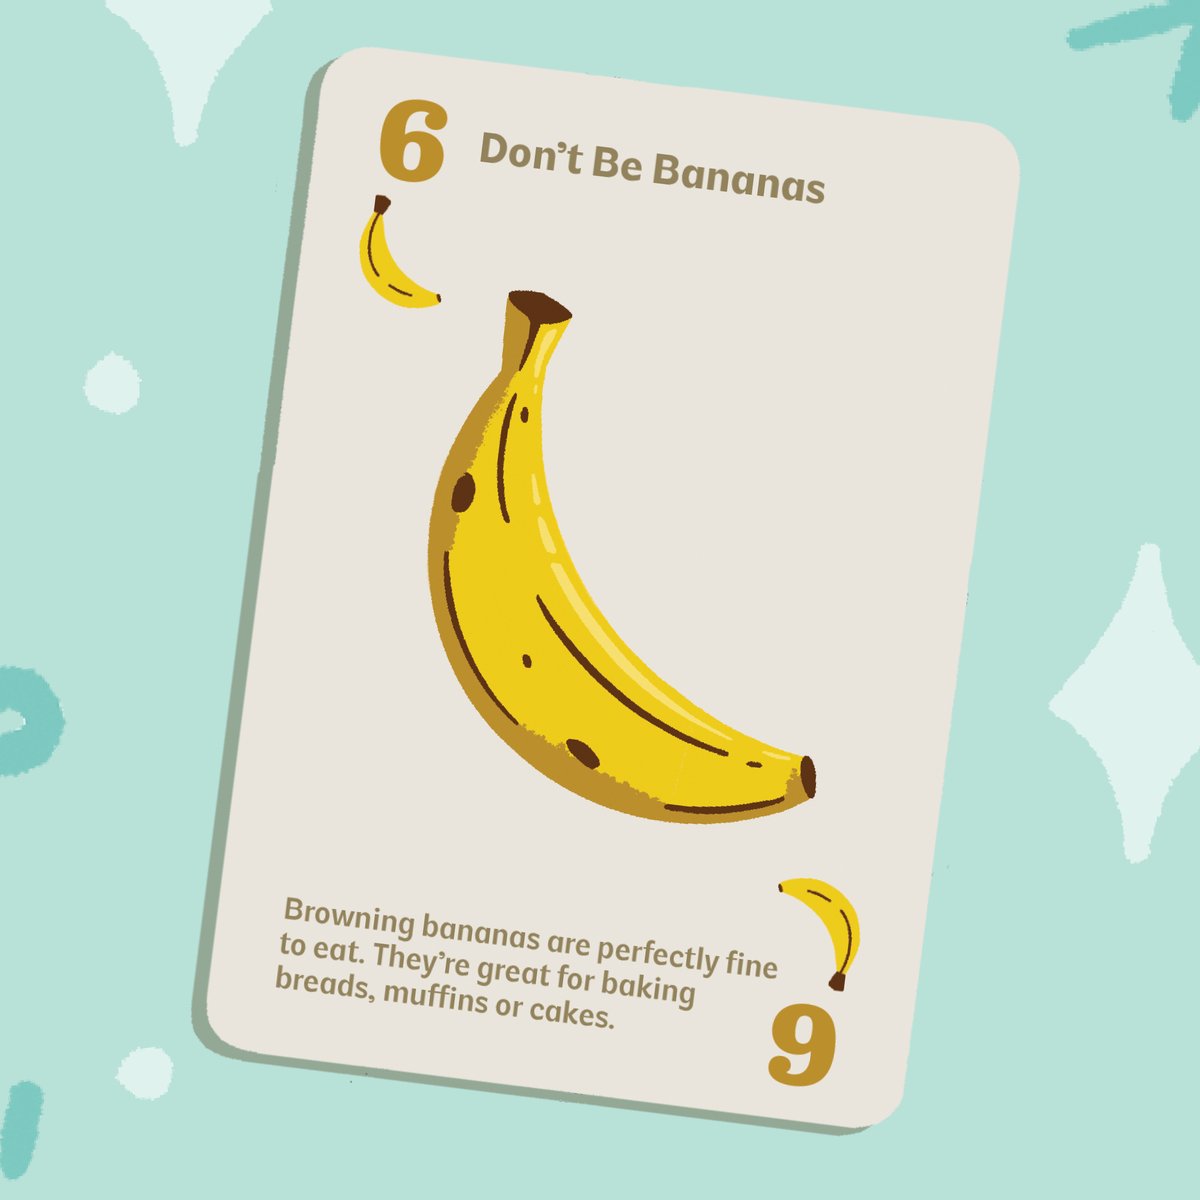 Our next tip is BANANAS! There are so many easy ways to reduce banana waste. Bruised bananas can be made into muffins, breads and more! 

Follow along for more #StopFoodWasteDay tips: bit.ly/3itwb9y